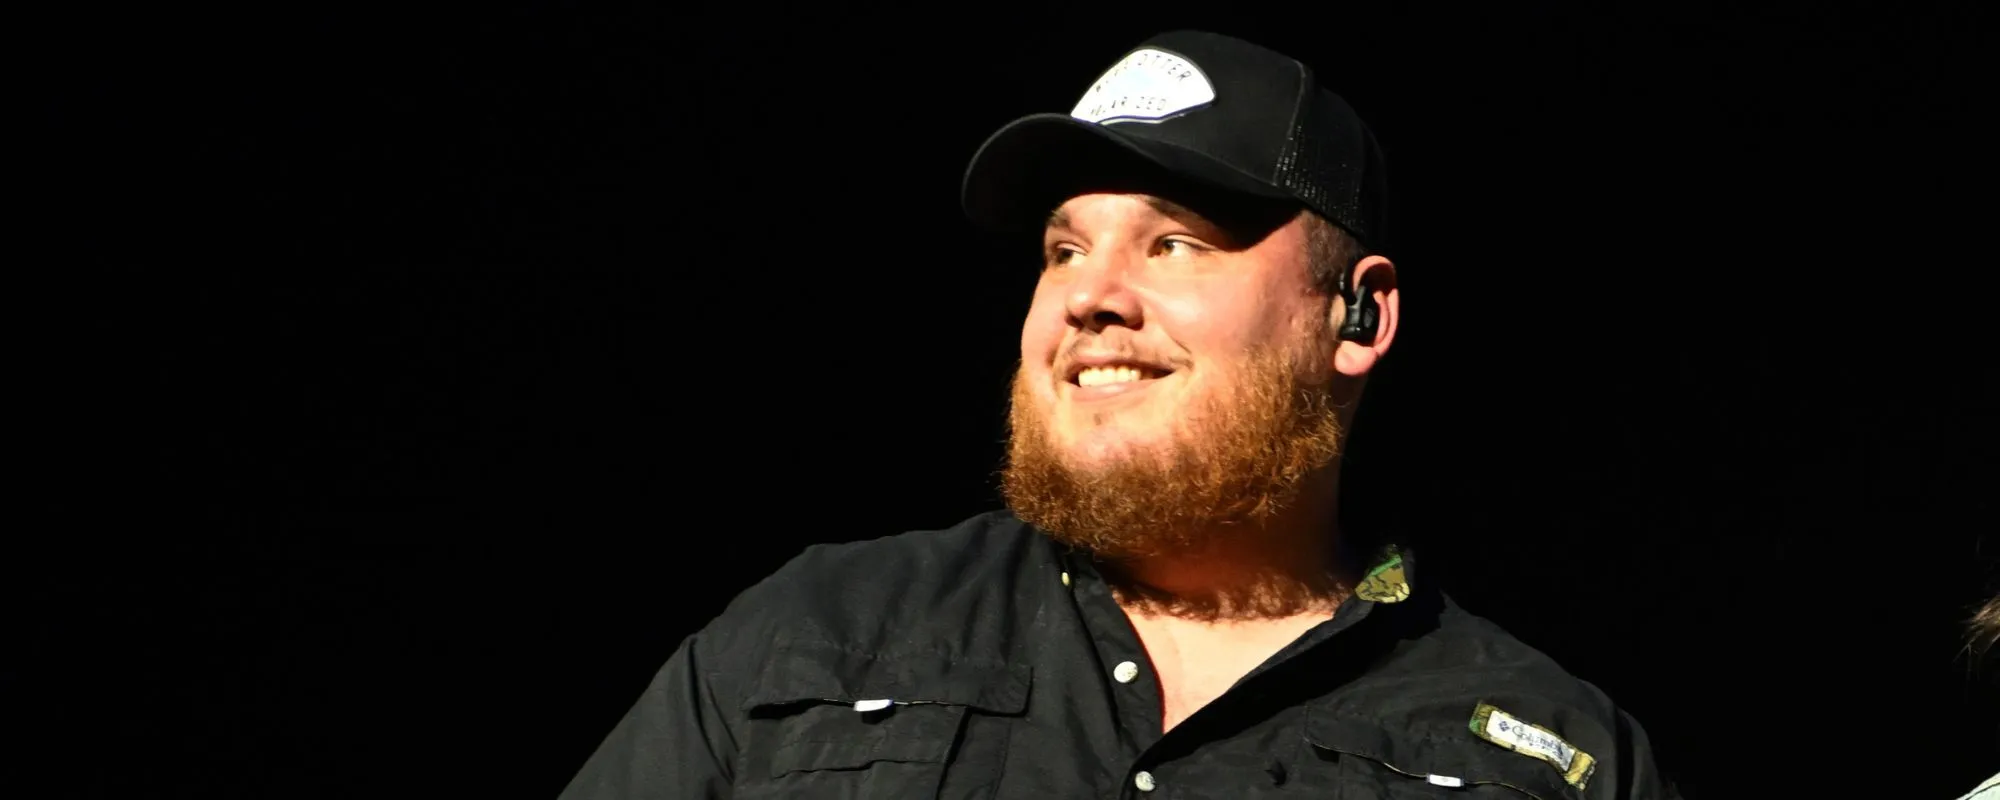 Luke Combs’ Record-Breaking Tour: Setlist, Tickets, & More